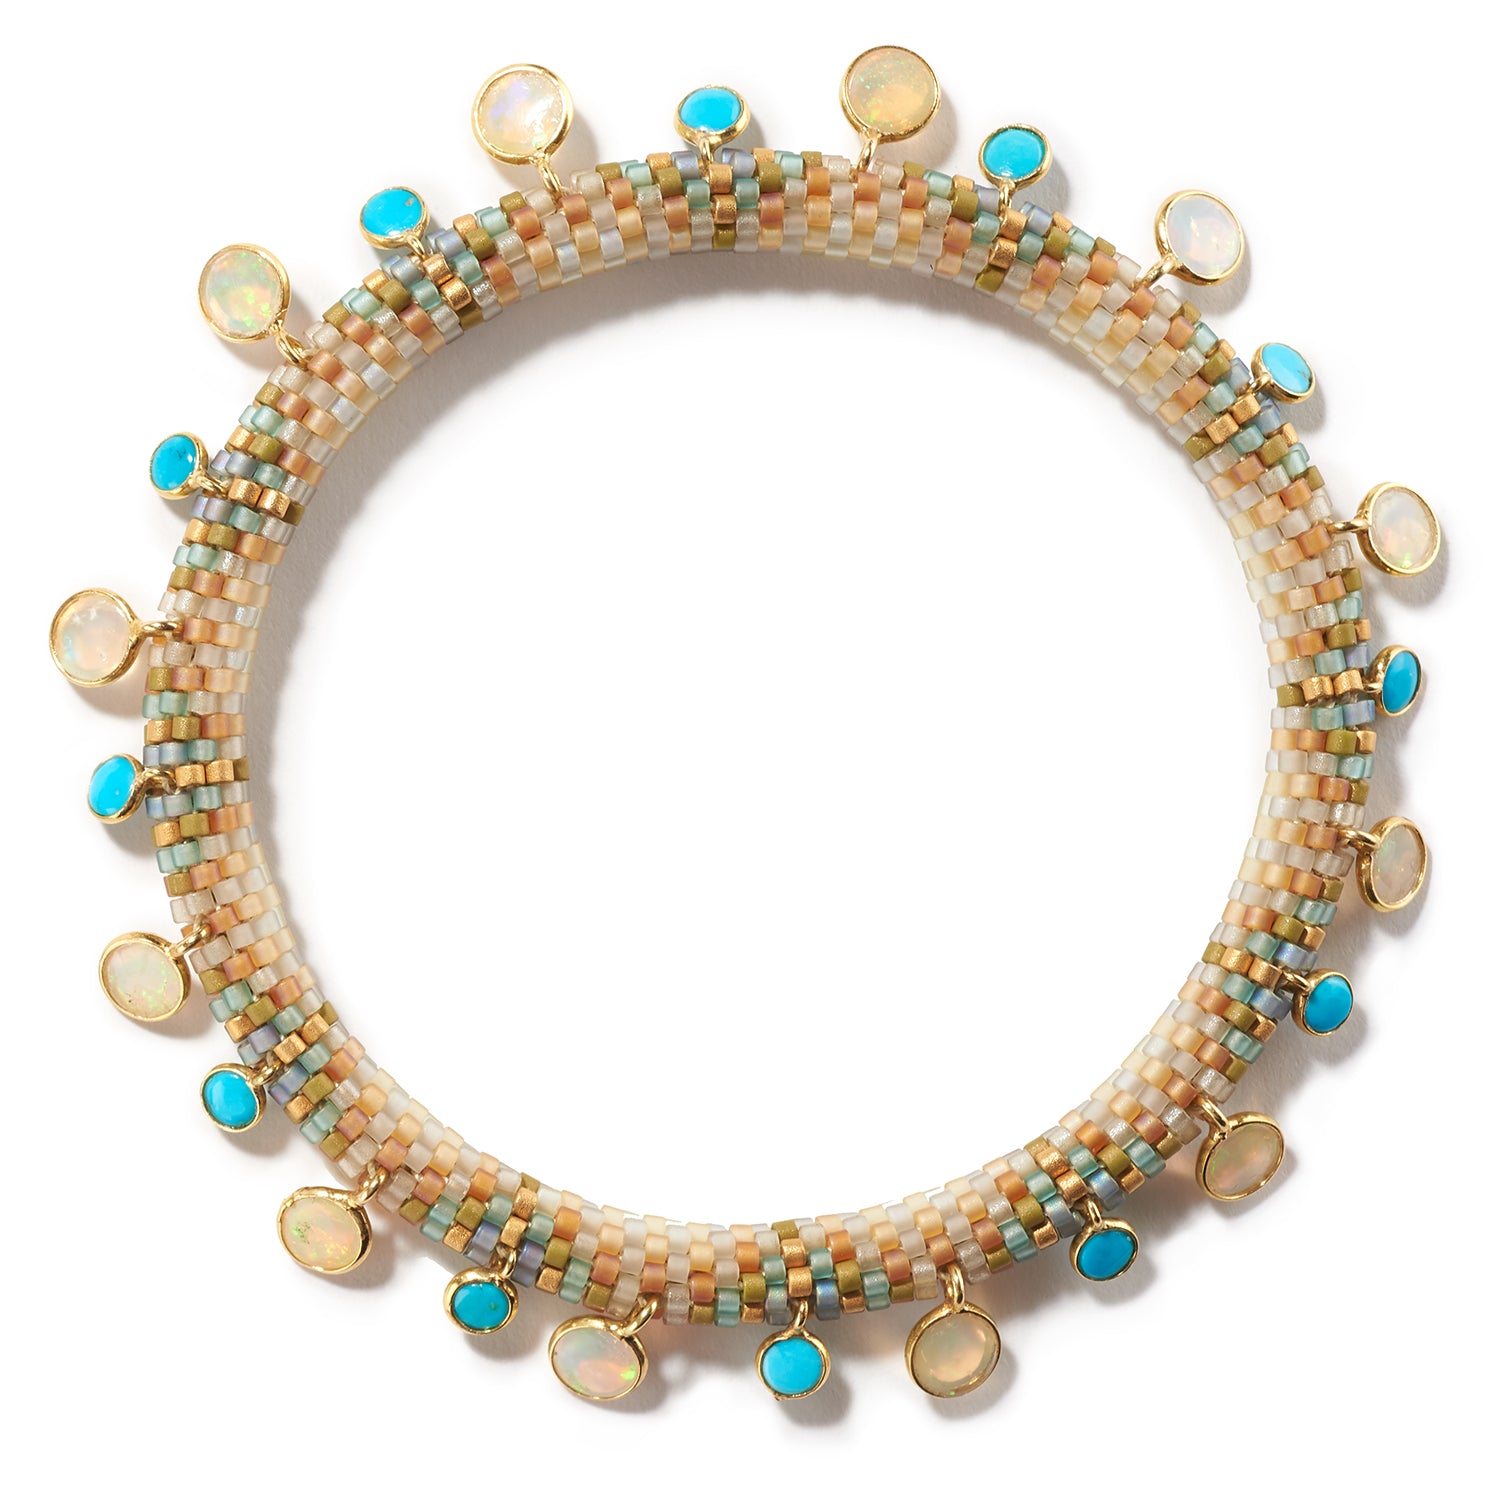 'Pools of Color' Bracelet with Opal and Turquoise